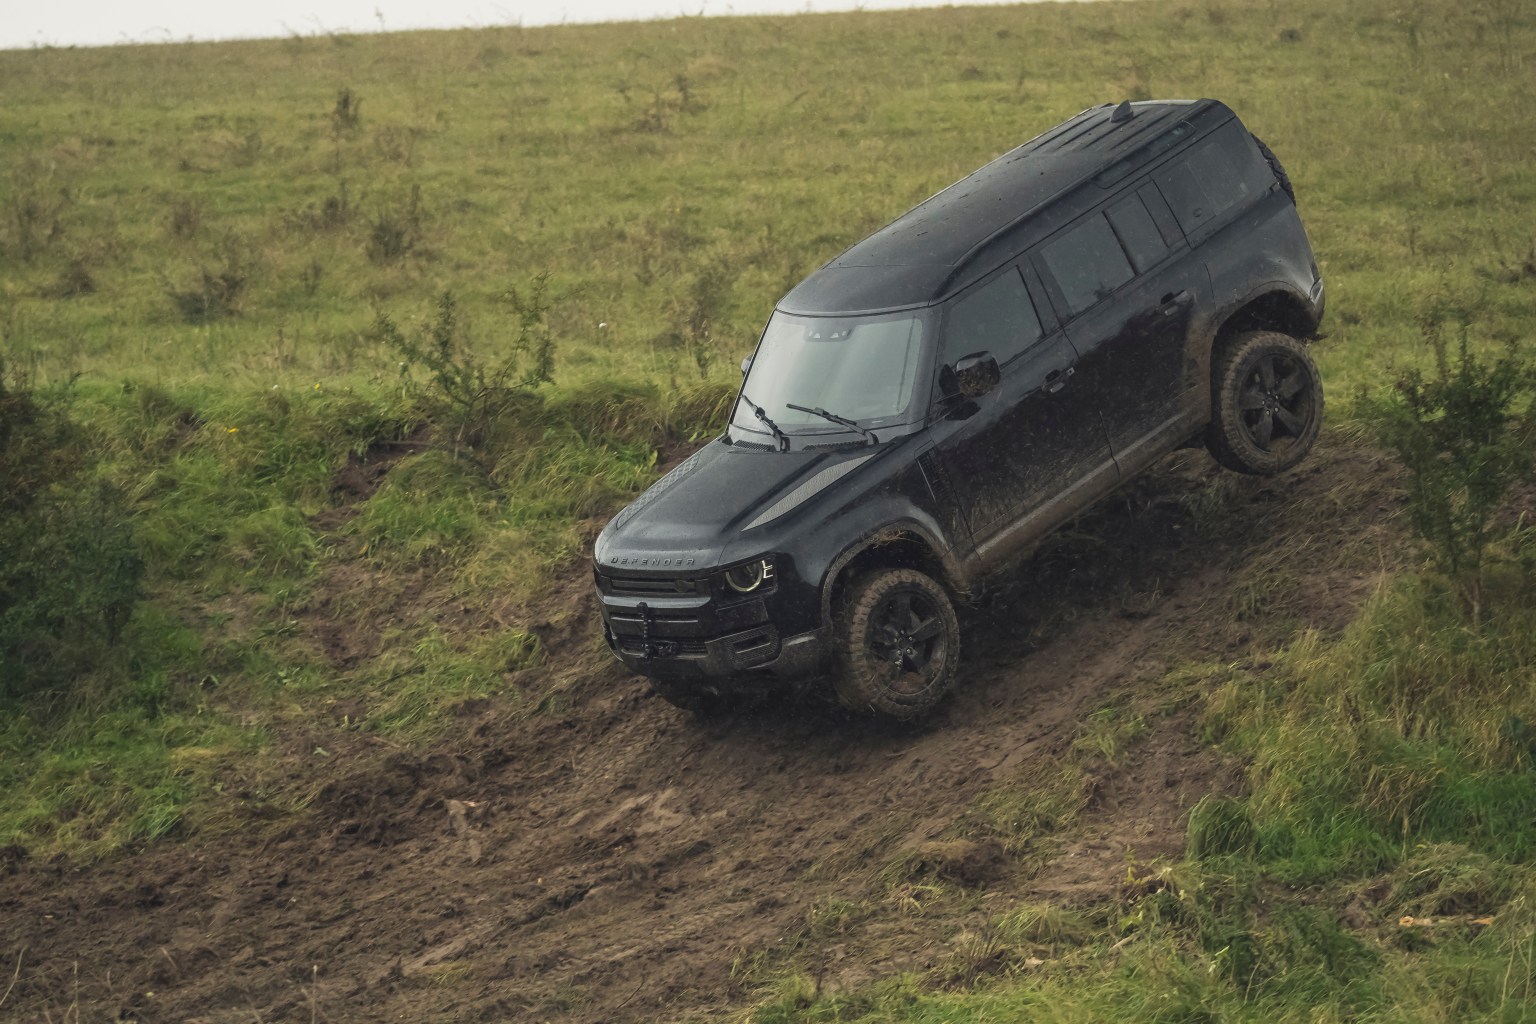 Behind-the-scenes-image-of-the-New-Land-Rover-Defender-featured-in-No-Time-To-Die-_01.jpg?resize=1536,1024